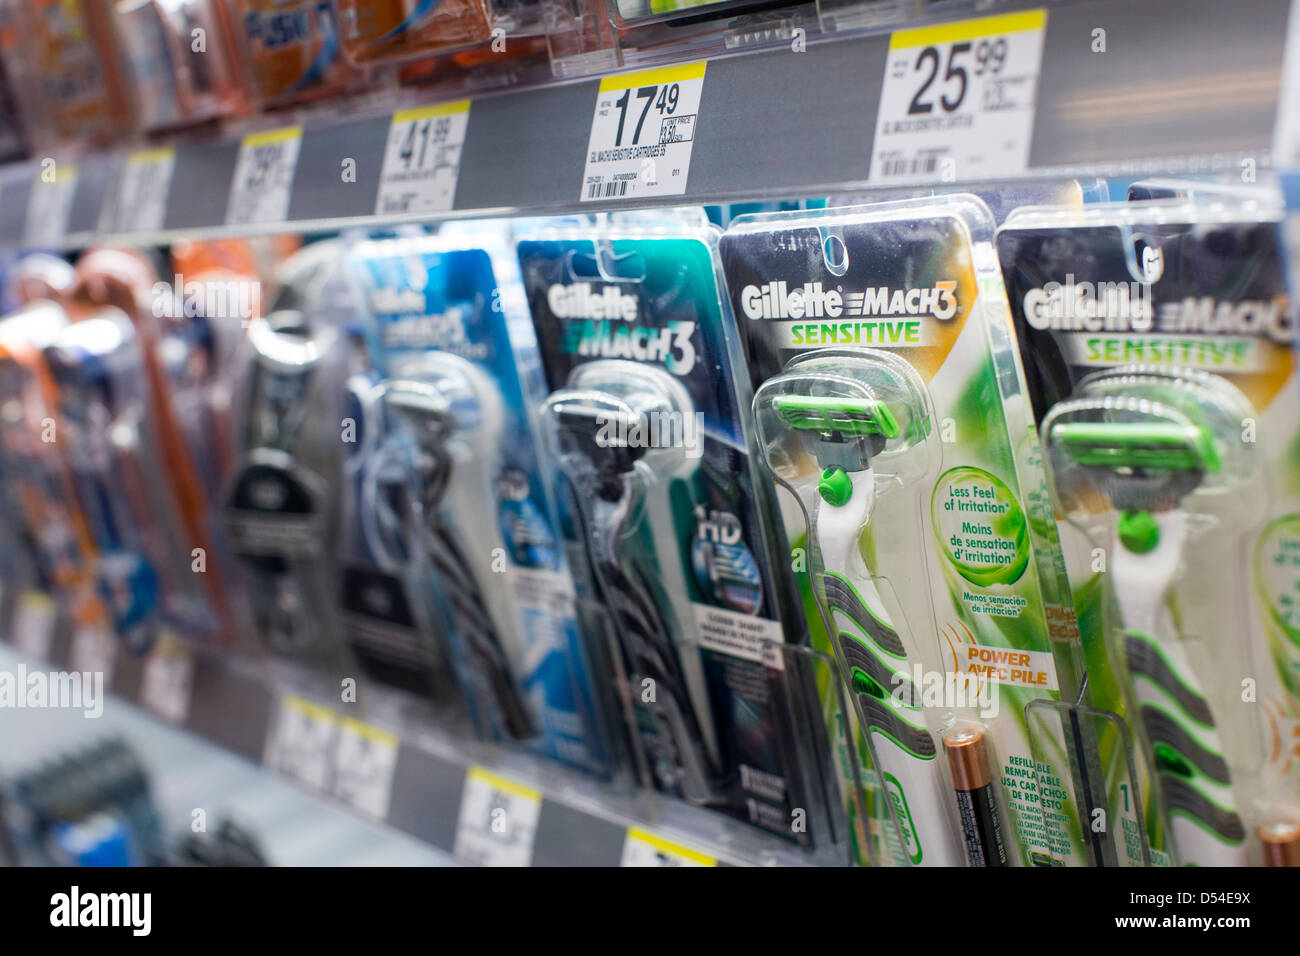 Gillette shaving products on display at a Walgreens Flagship store. Stock Photo